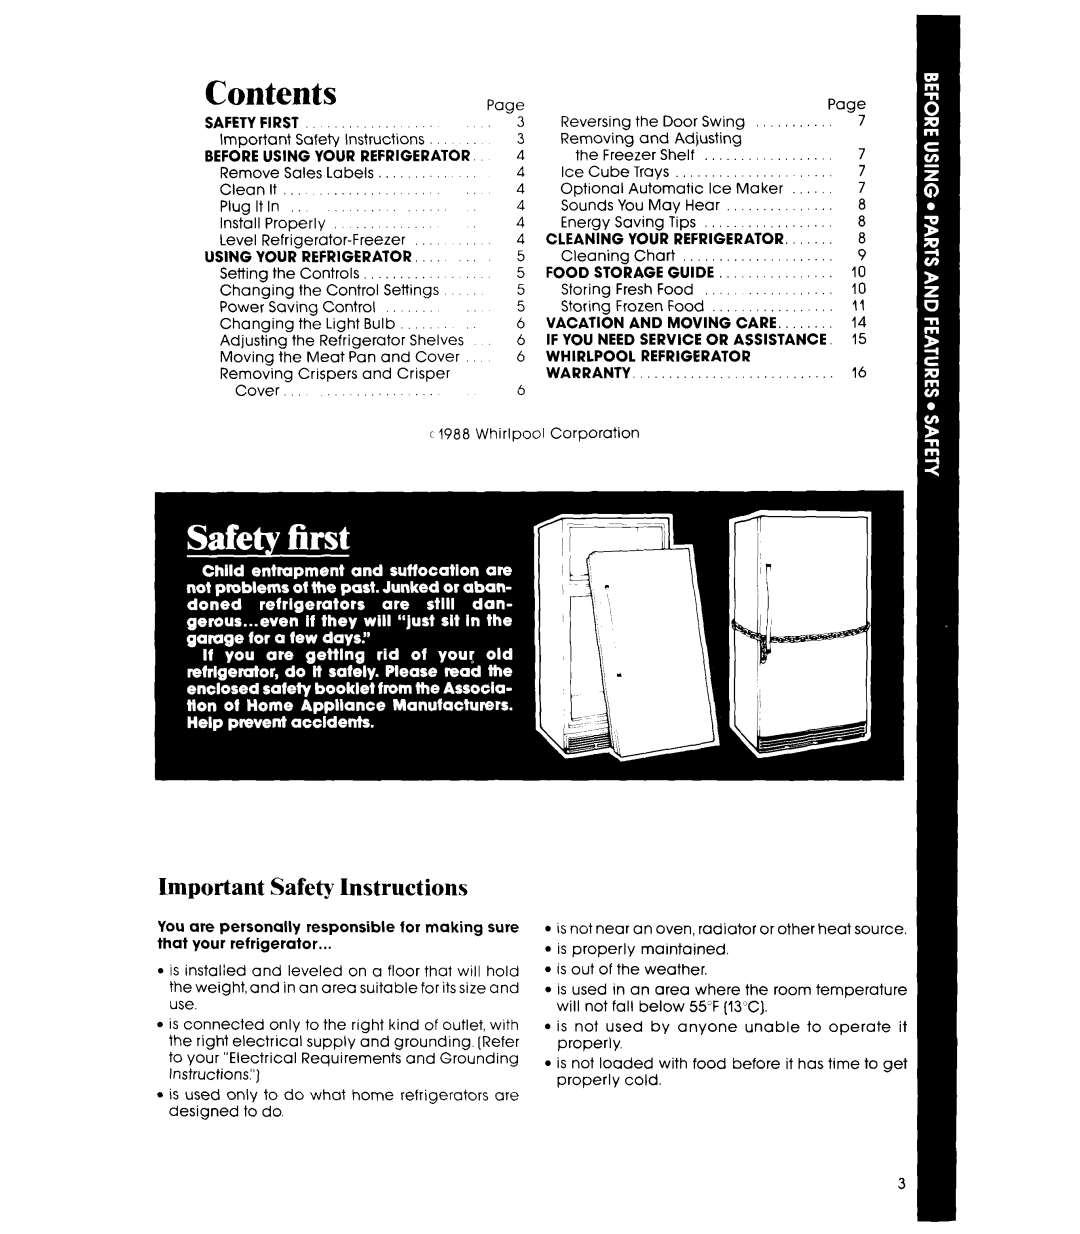 Whirlpool ETl8GK, ET18HK manual Contents, Important Safety Instructions 